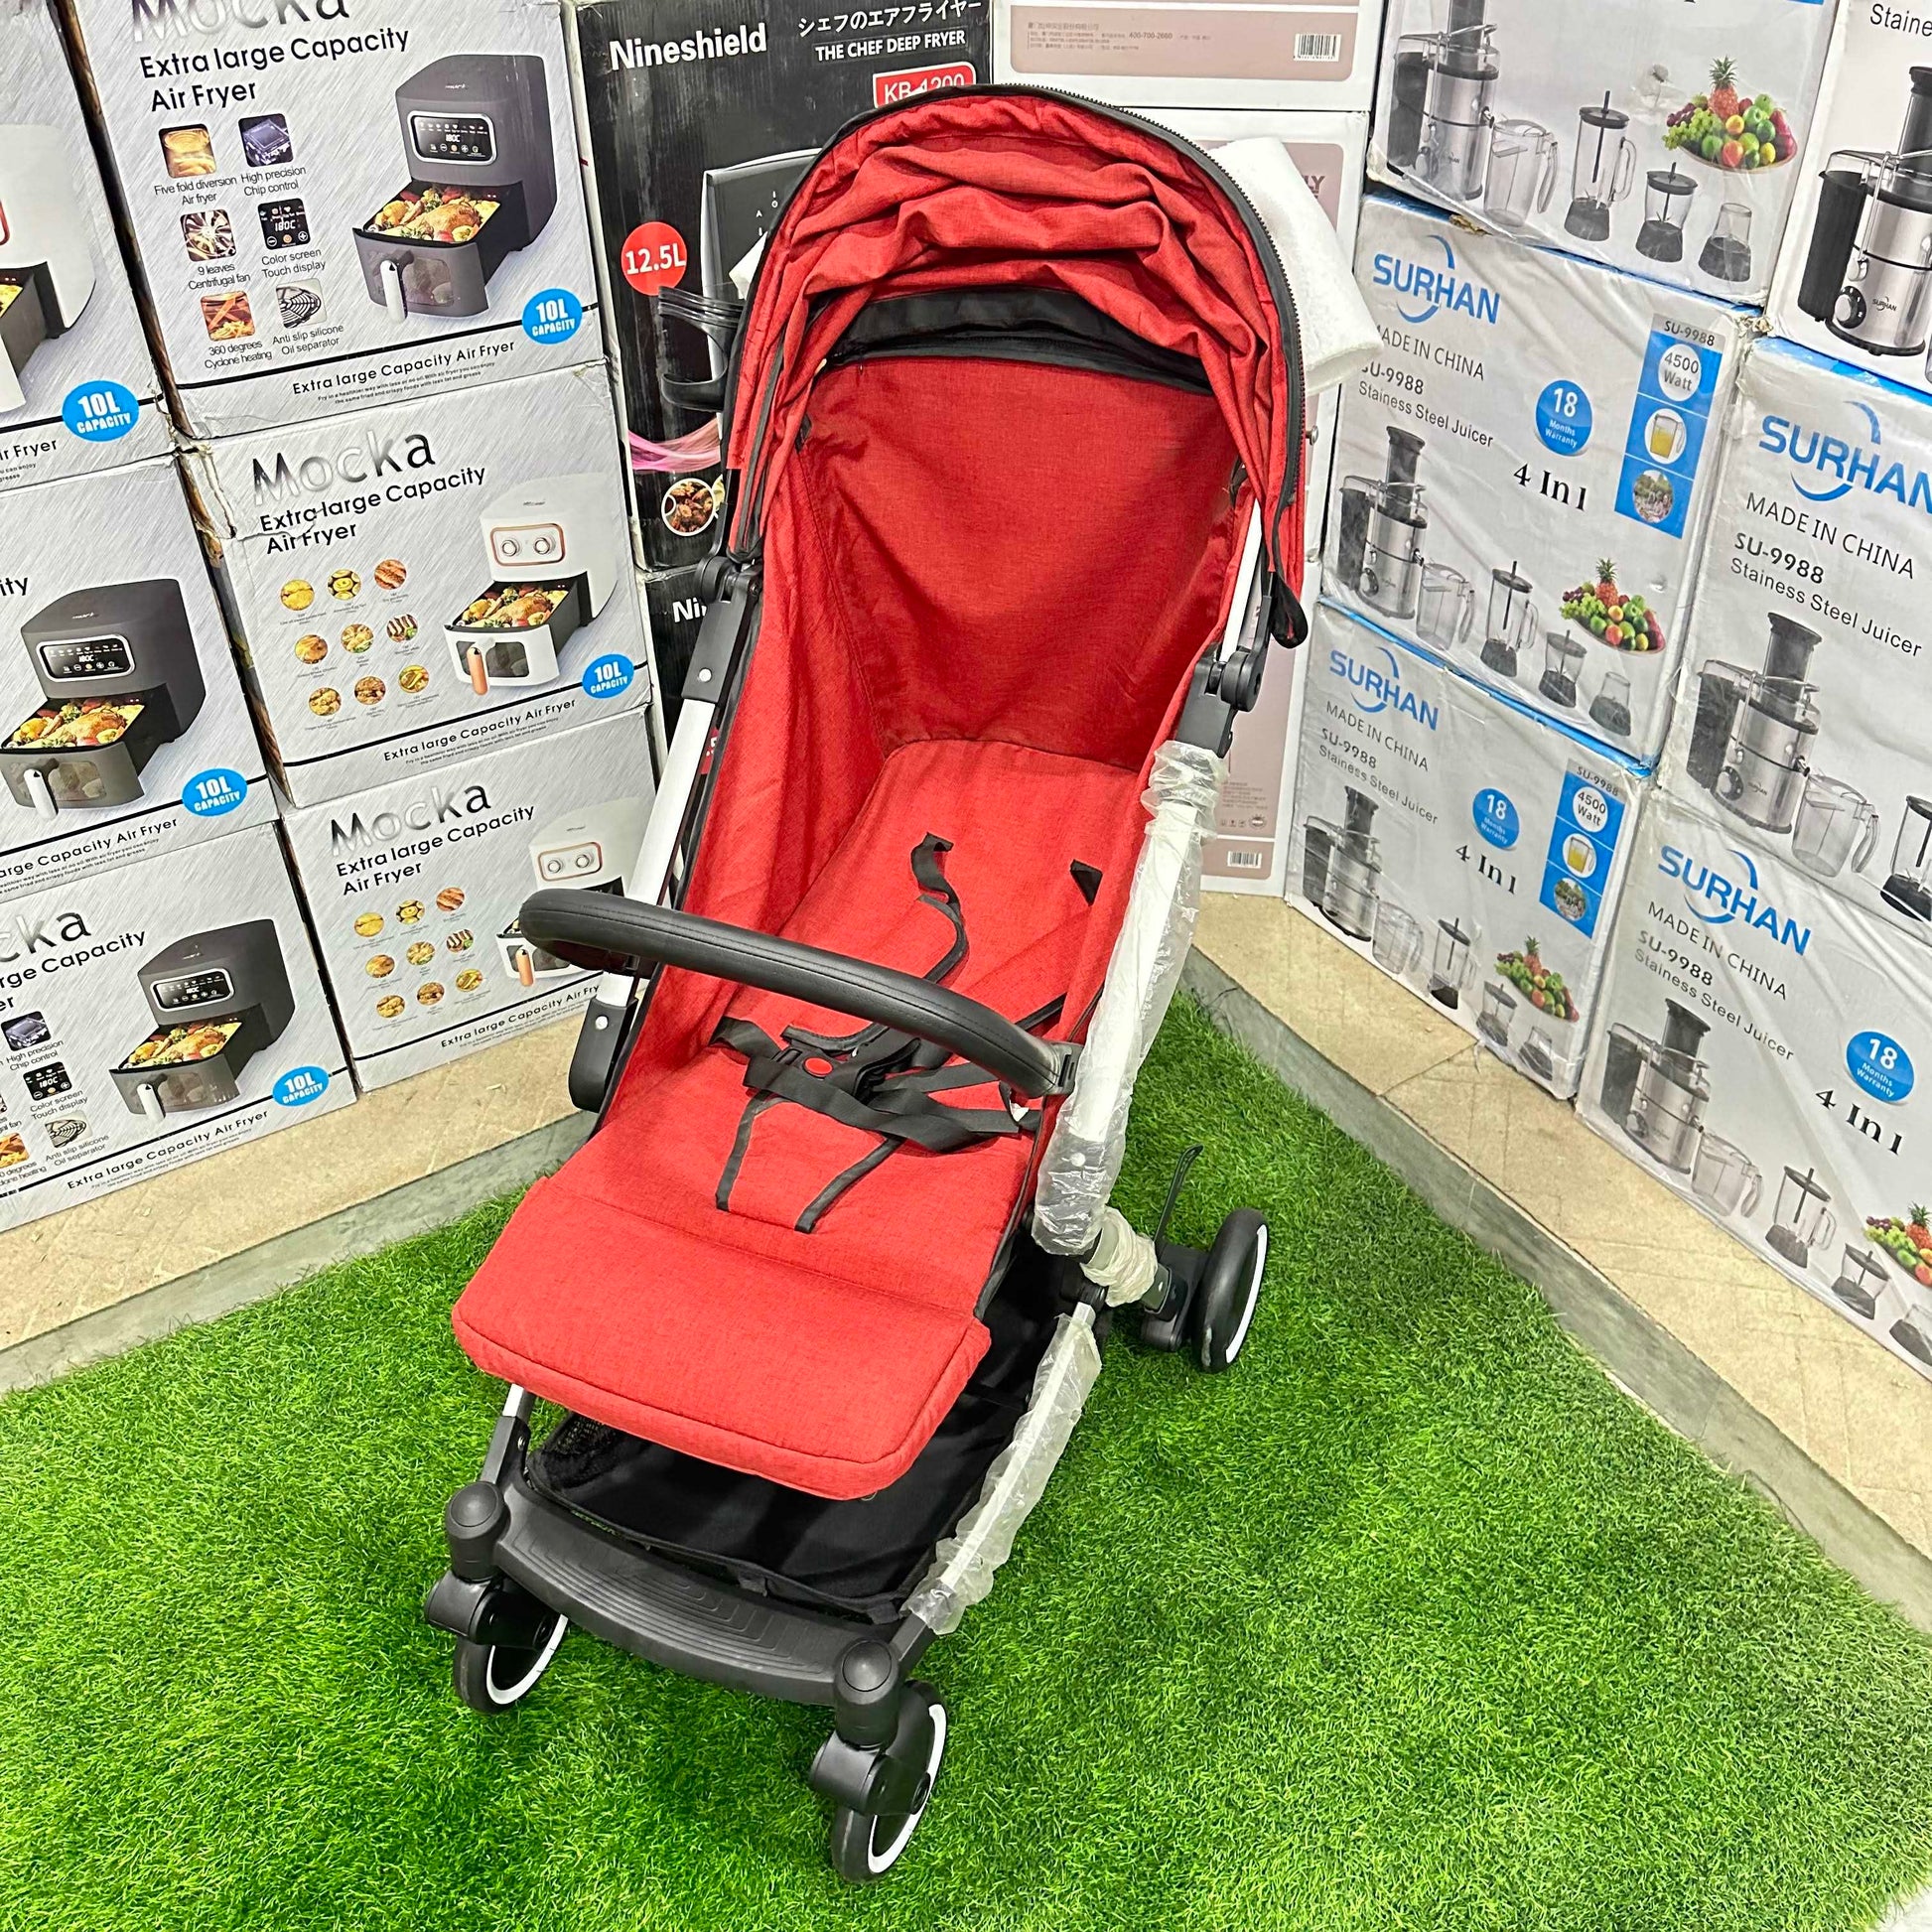 Imported MaikcQ Baby Stroller (308 – Red)